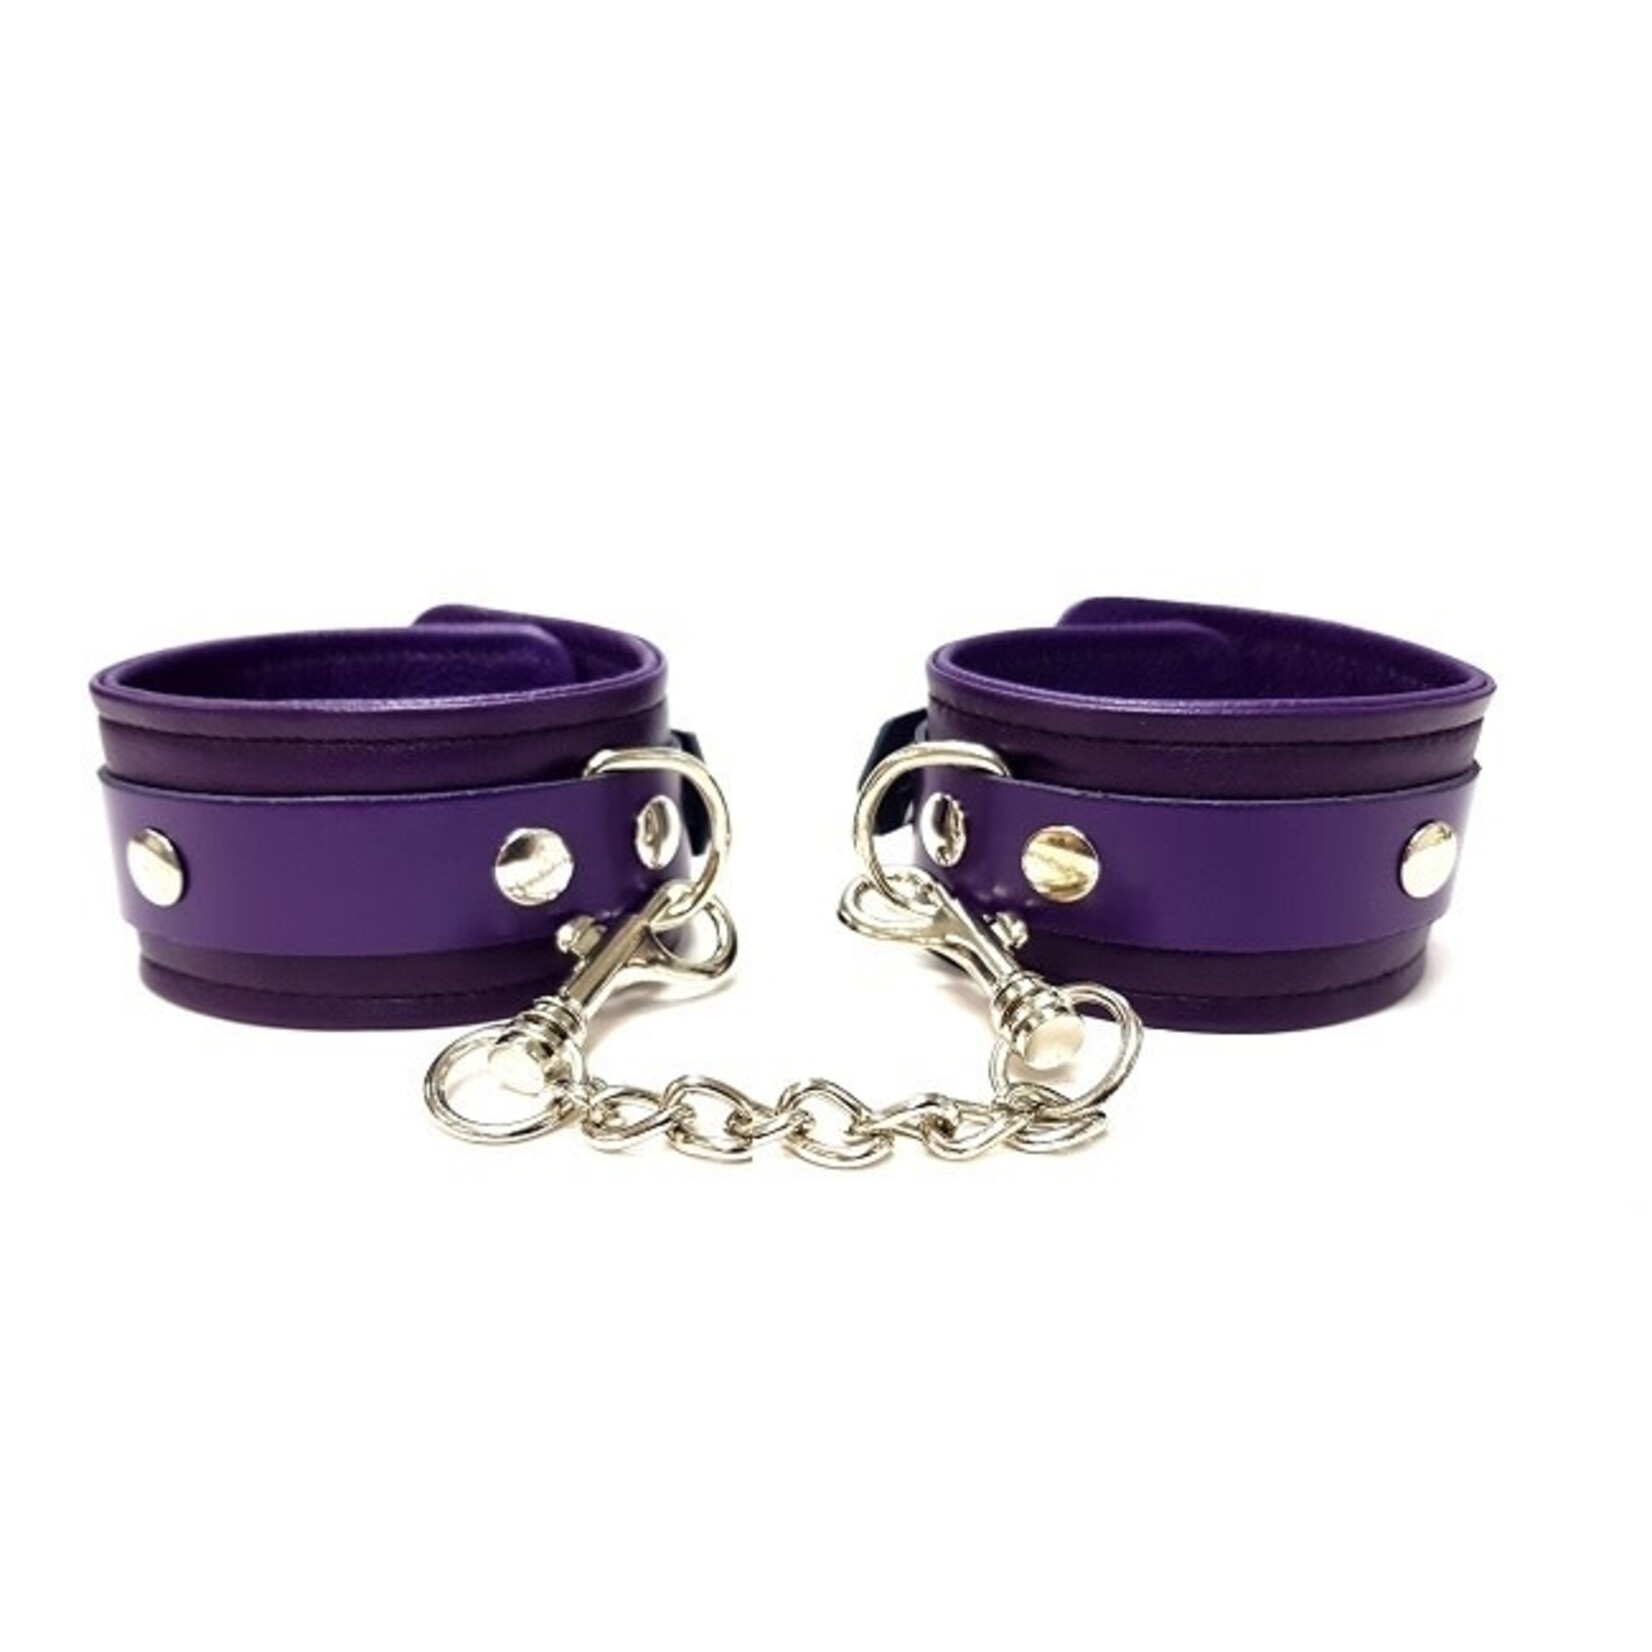 Rouge Rouge Leather Wrist Cuffs